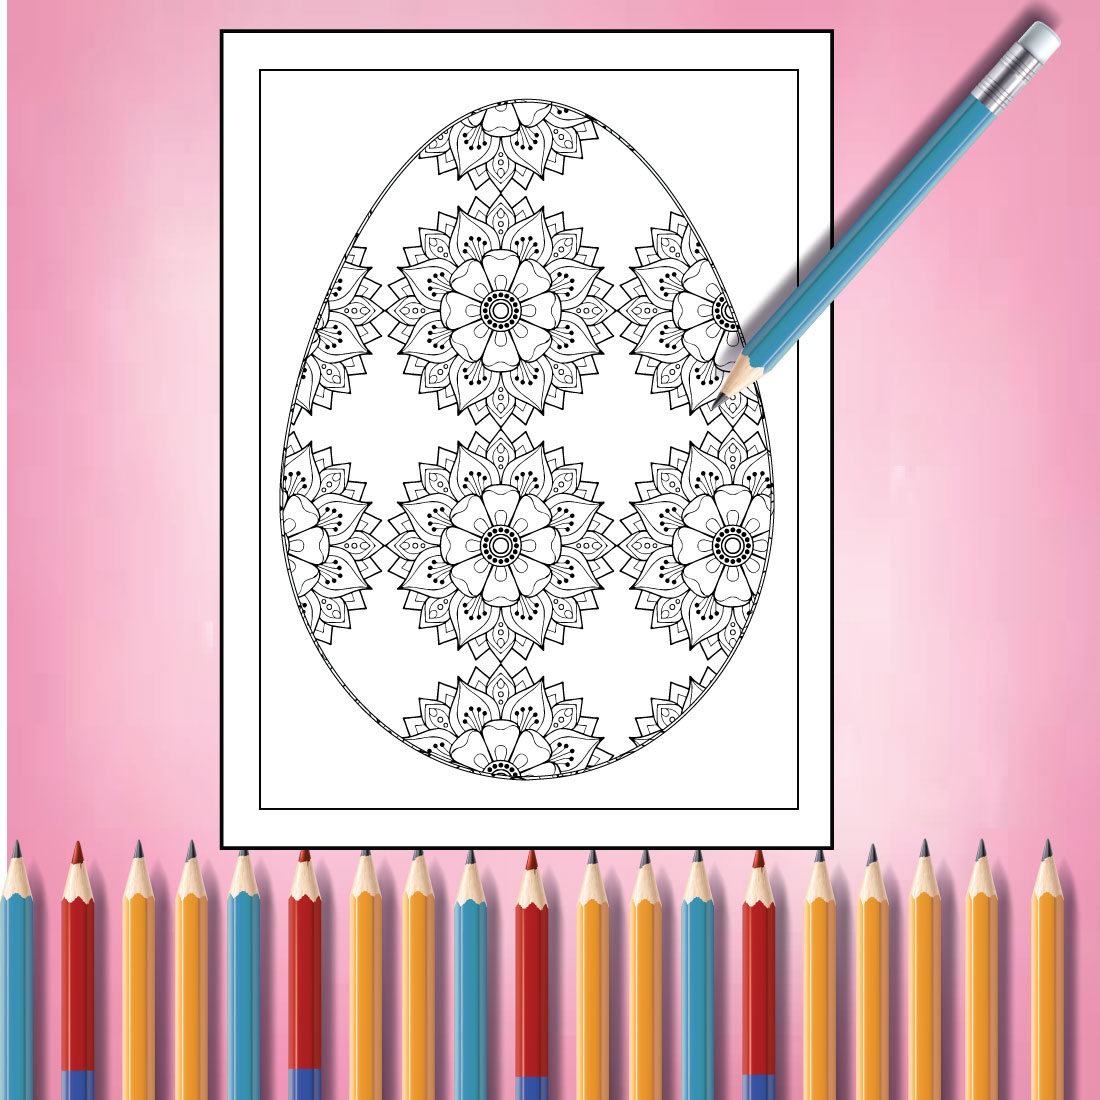 Picture of a coloring page with pencils.